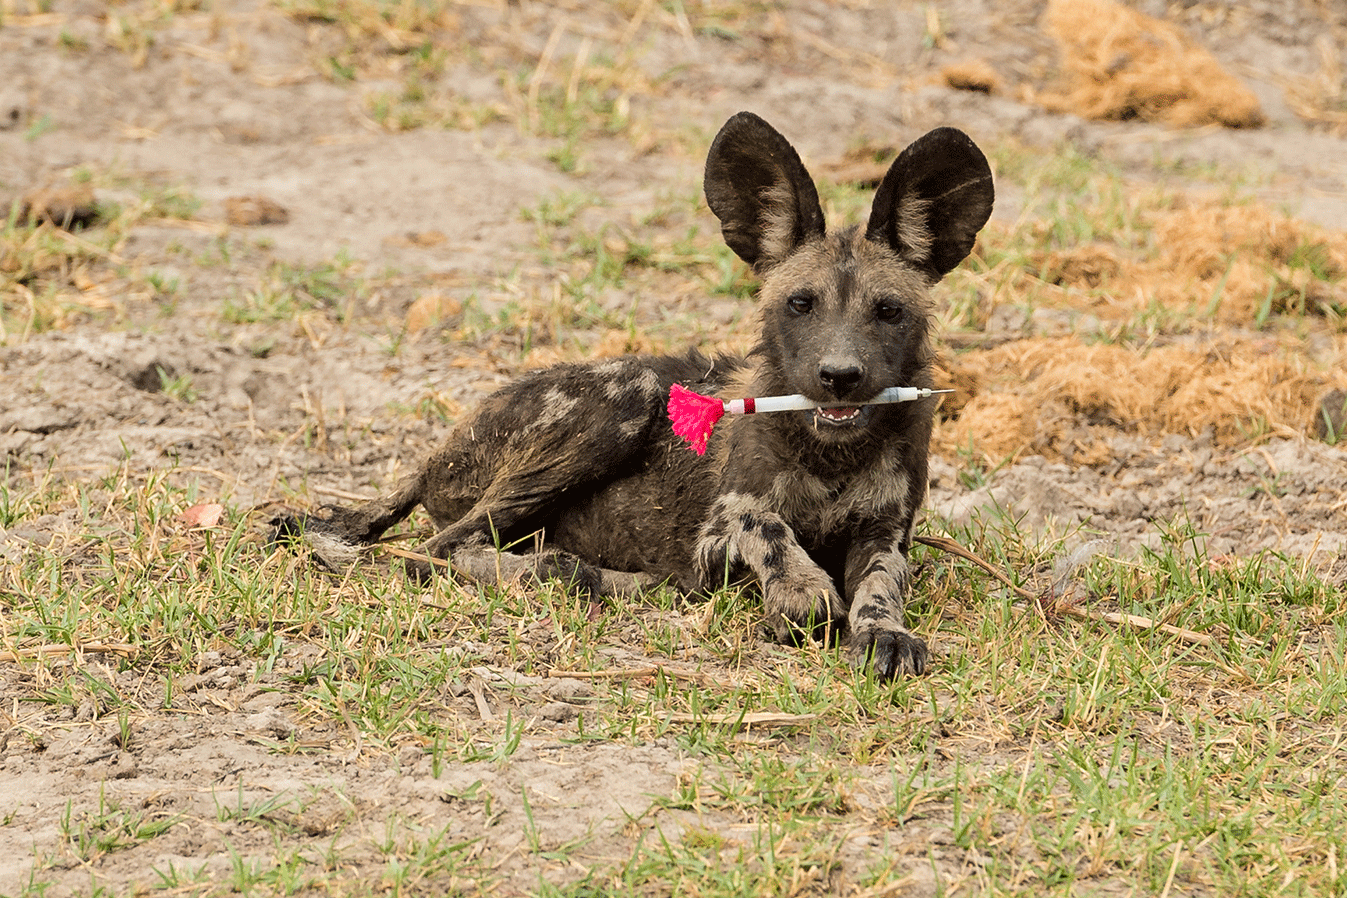 On a research trip, Dominik Behr from the Department of Evolutionary Biology and Environmental Studies of UZH photographed an African wild dog pup. The pup had repurposed one the researcher’s tranquilizer darts as a toy.